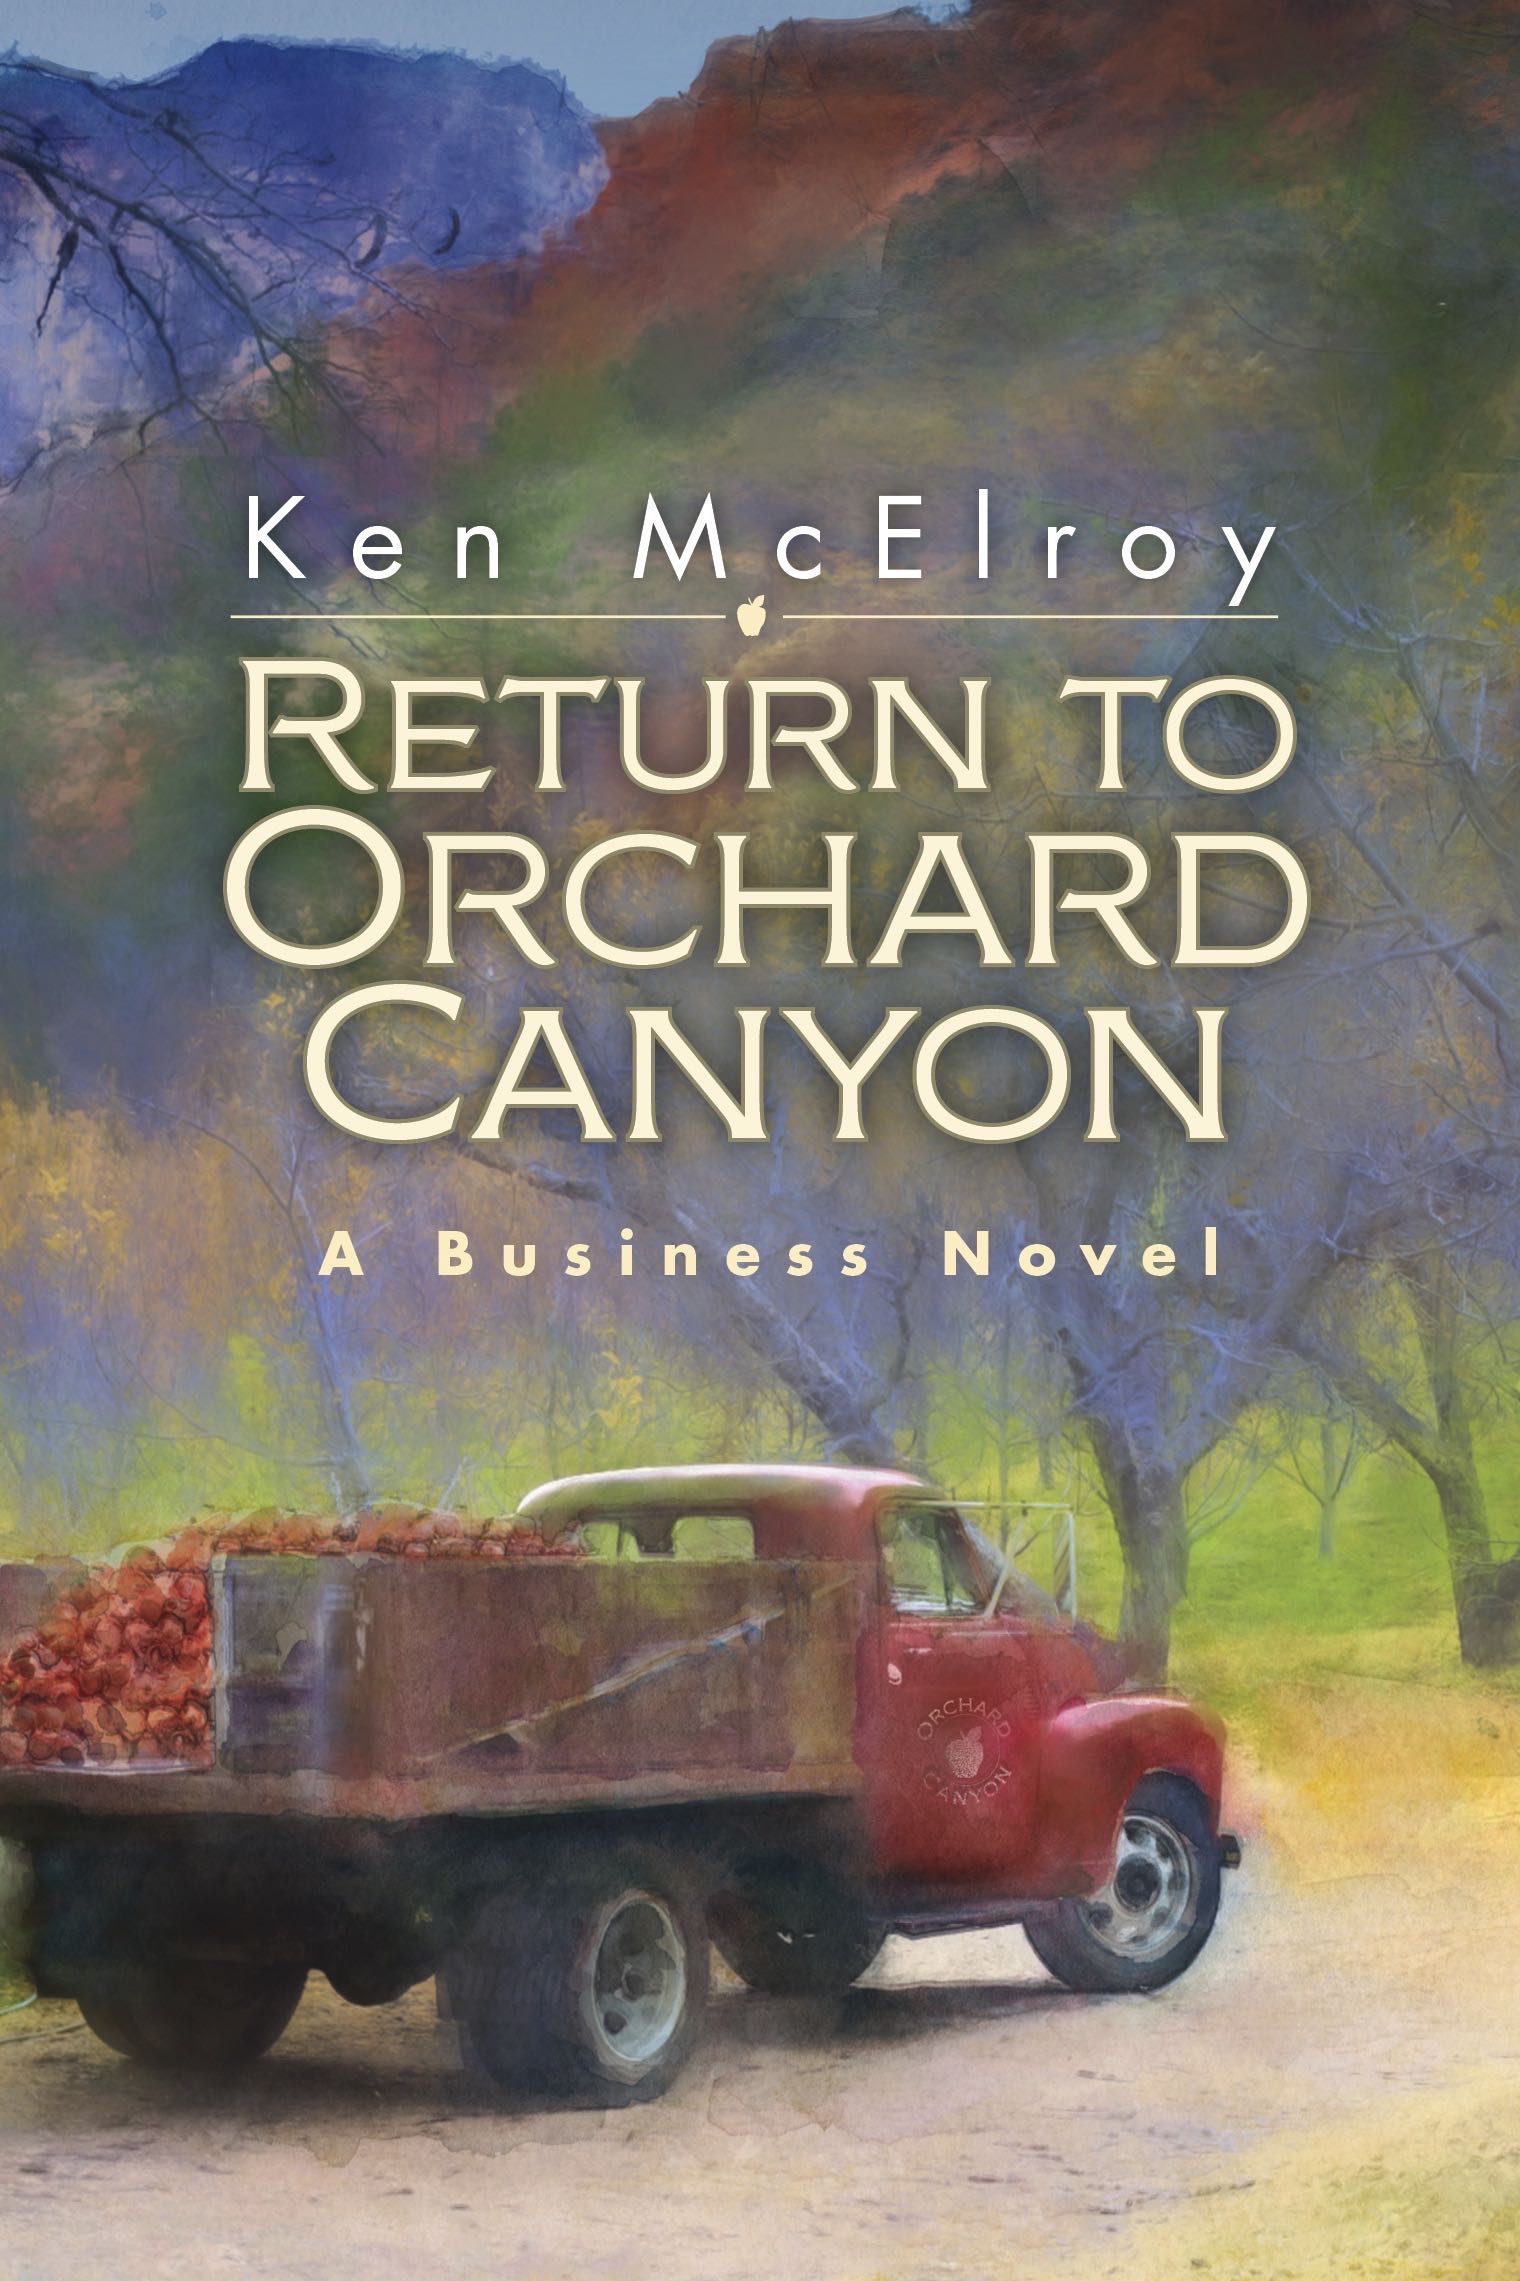 Return to Orchard Canyon by Rich Dad Advisor Ken McElroy